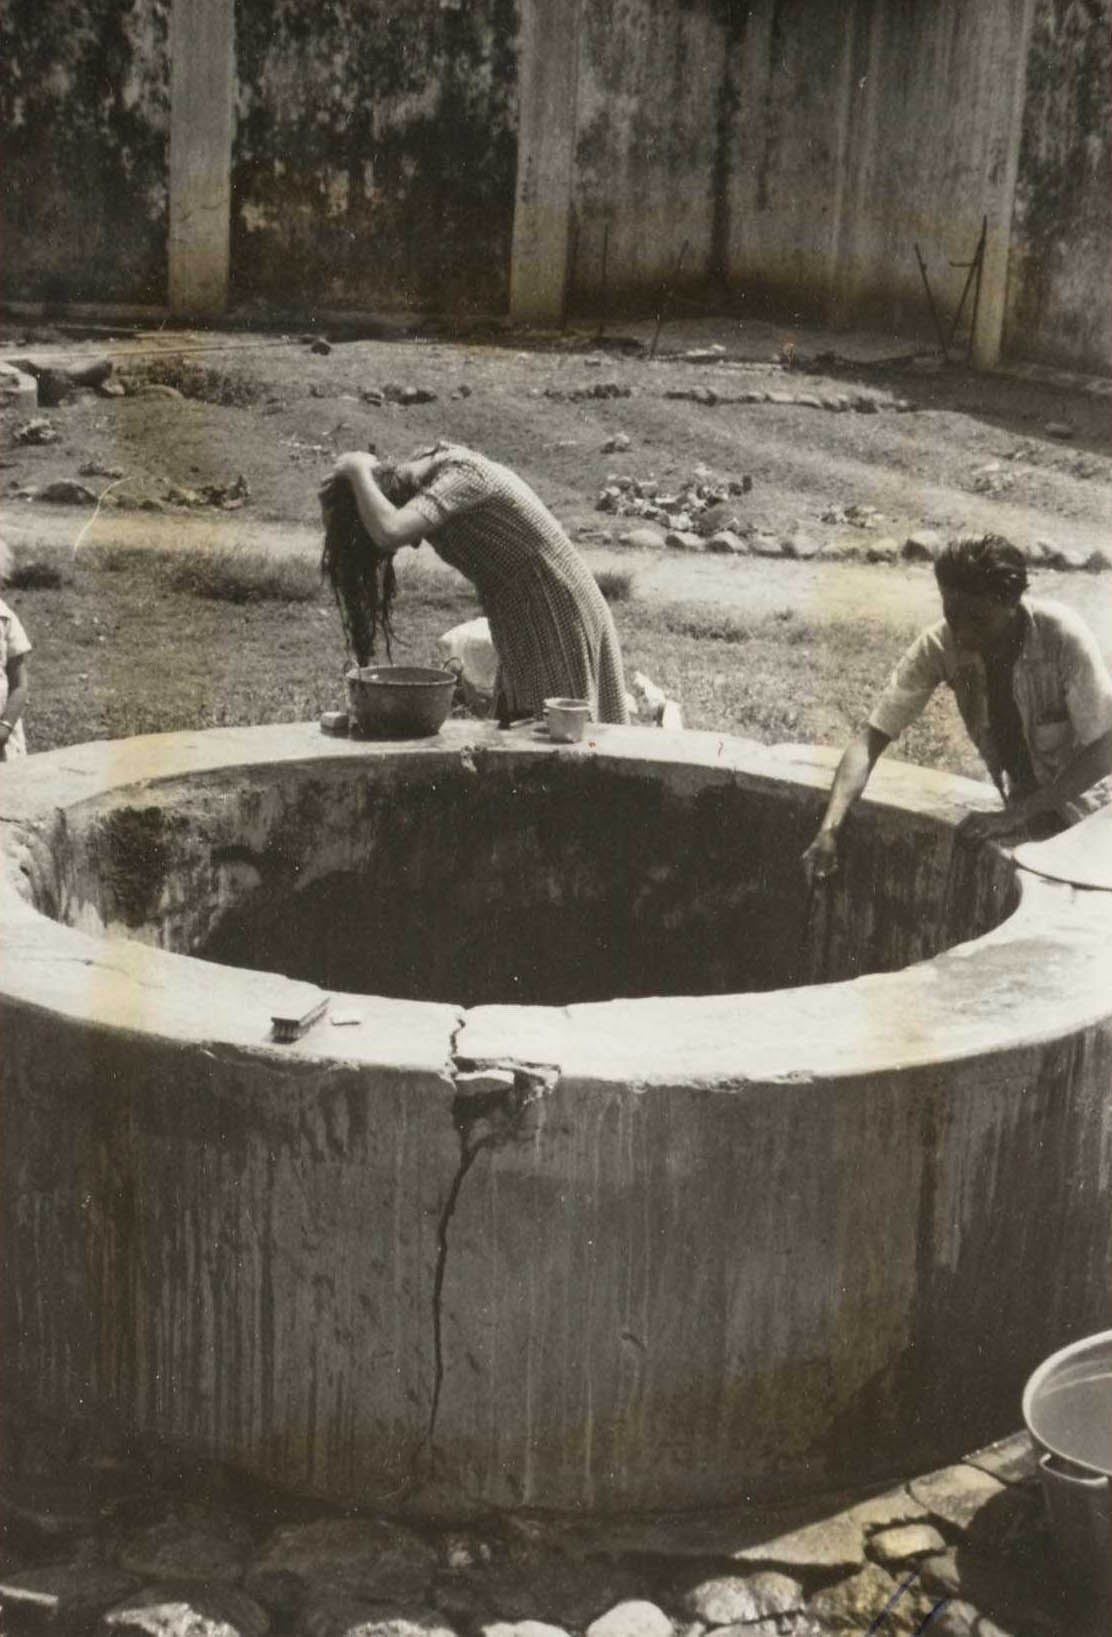 Dutch Indonesia Concentration camp with woman bathing